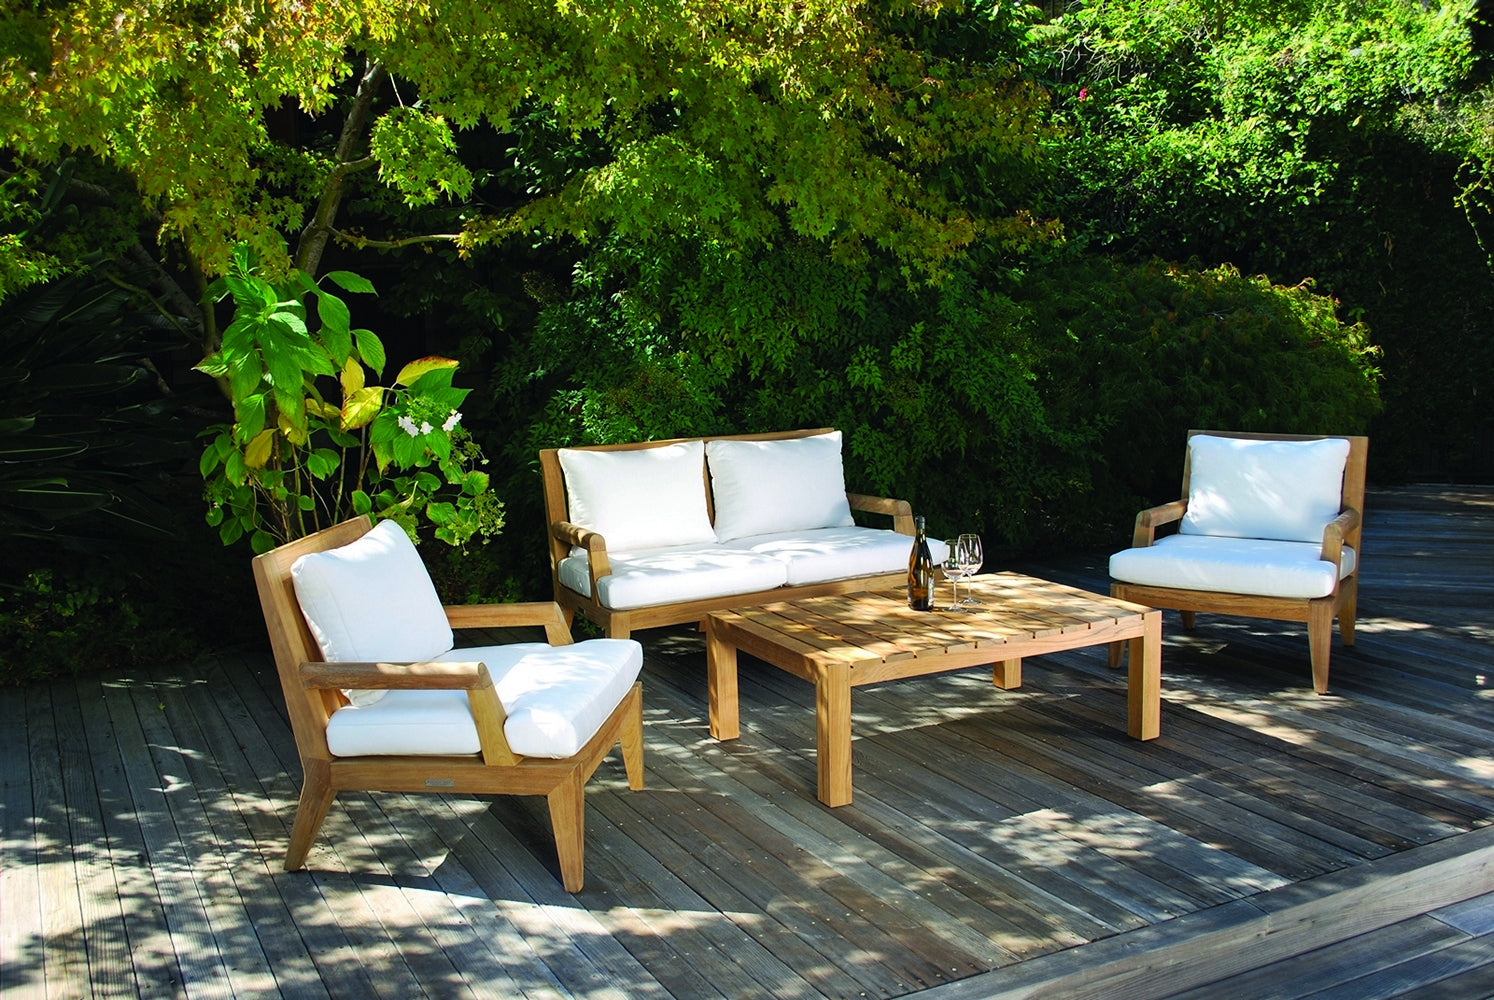 Best outdoor patio furniture: Where to buy at any budget - Curbed